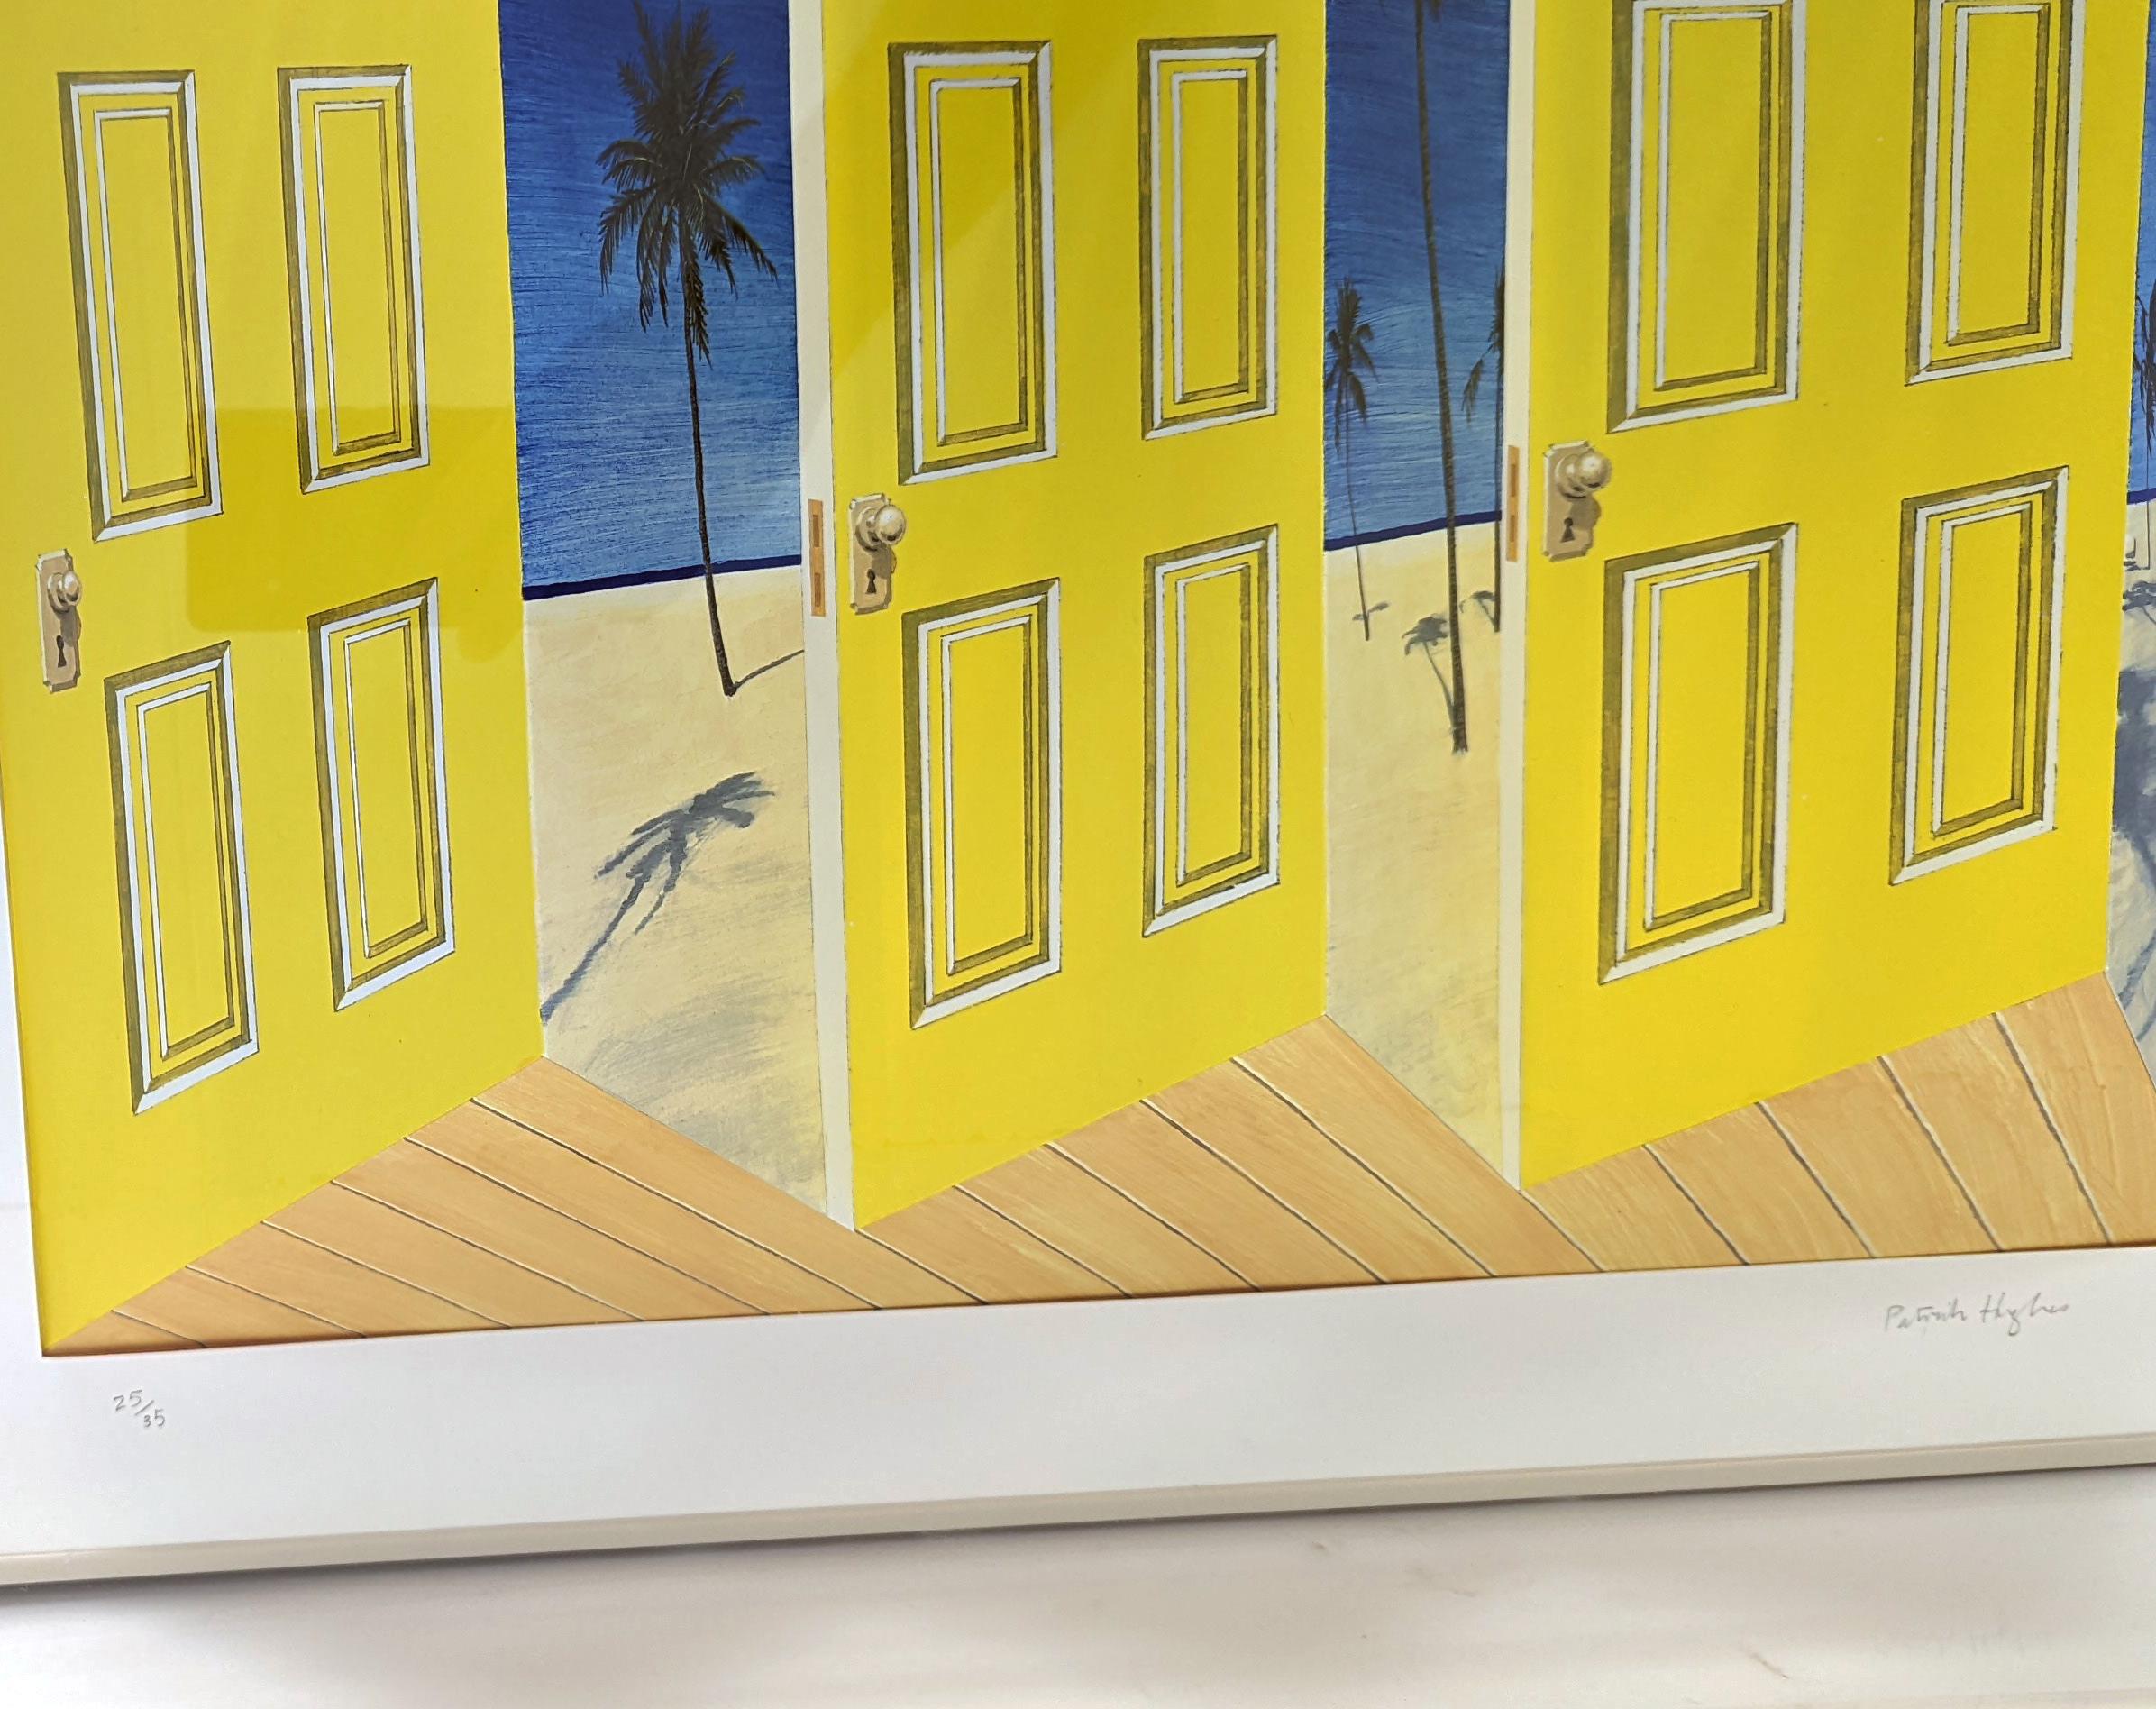 PALM DOOR (3D HAND PAINTED MULTIPLE) - Contemporary Print by Patrick Hughes